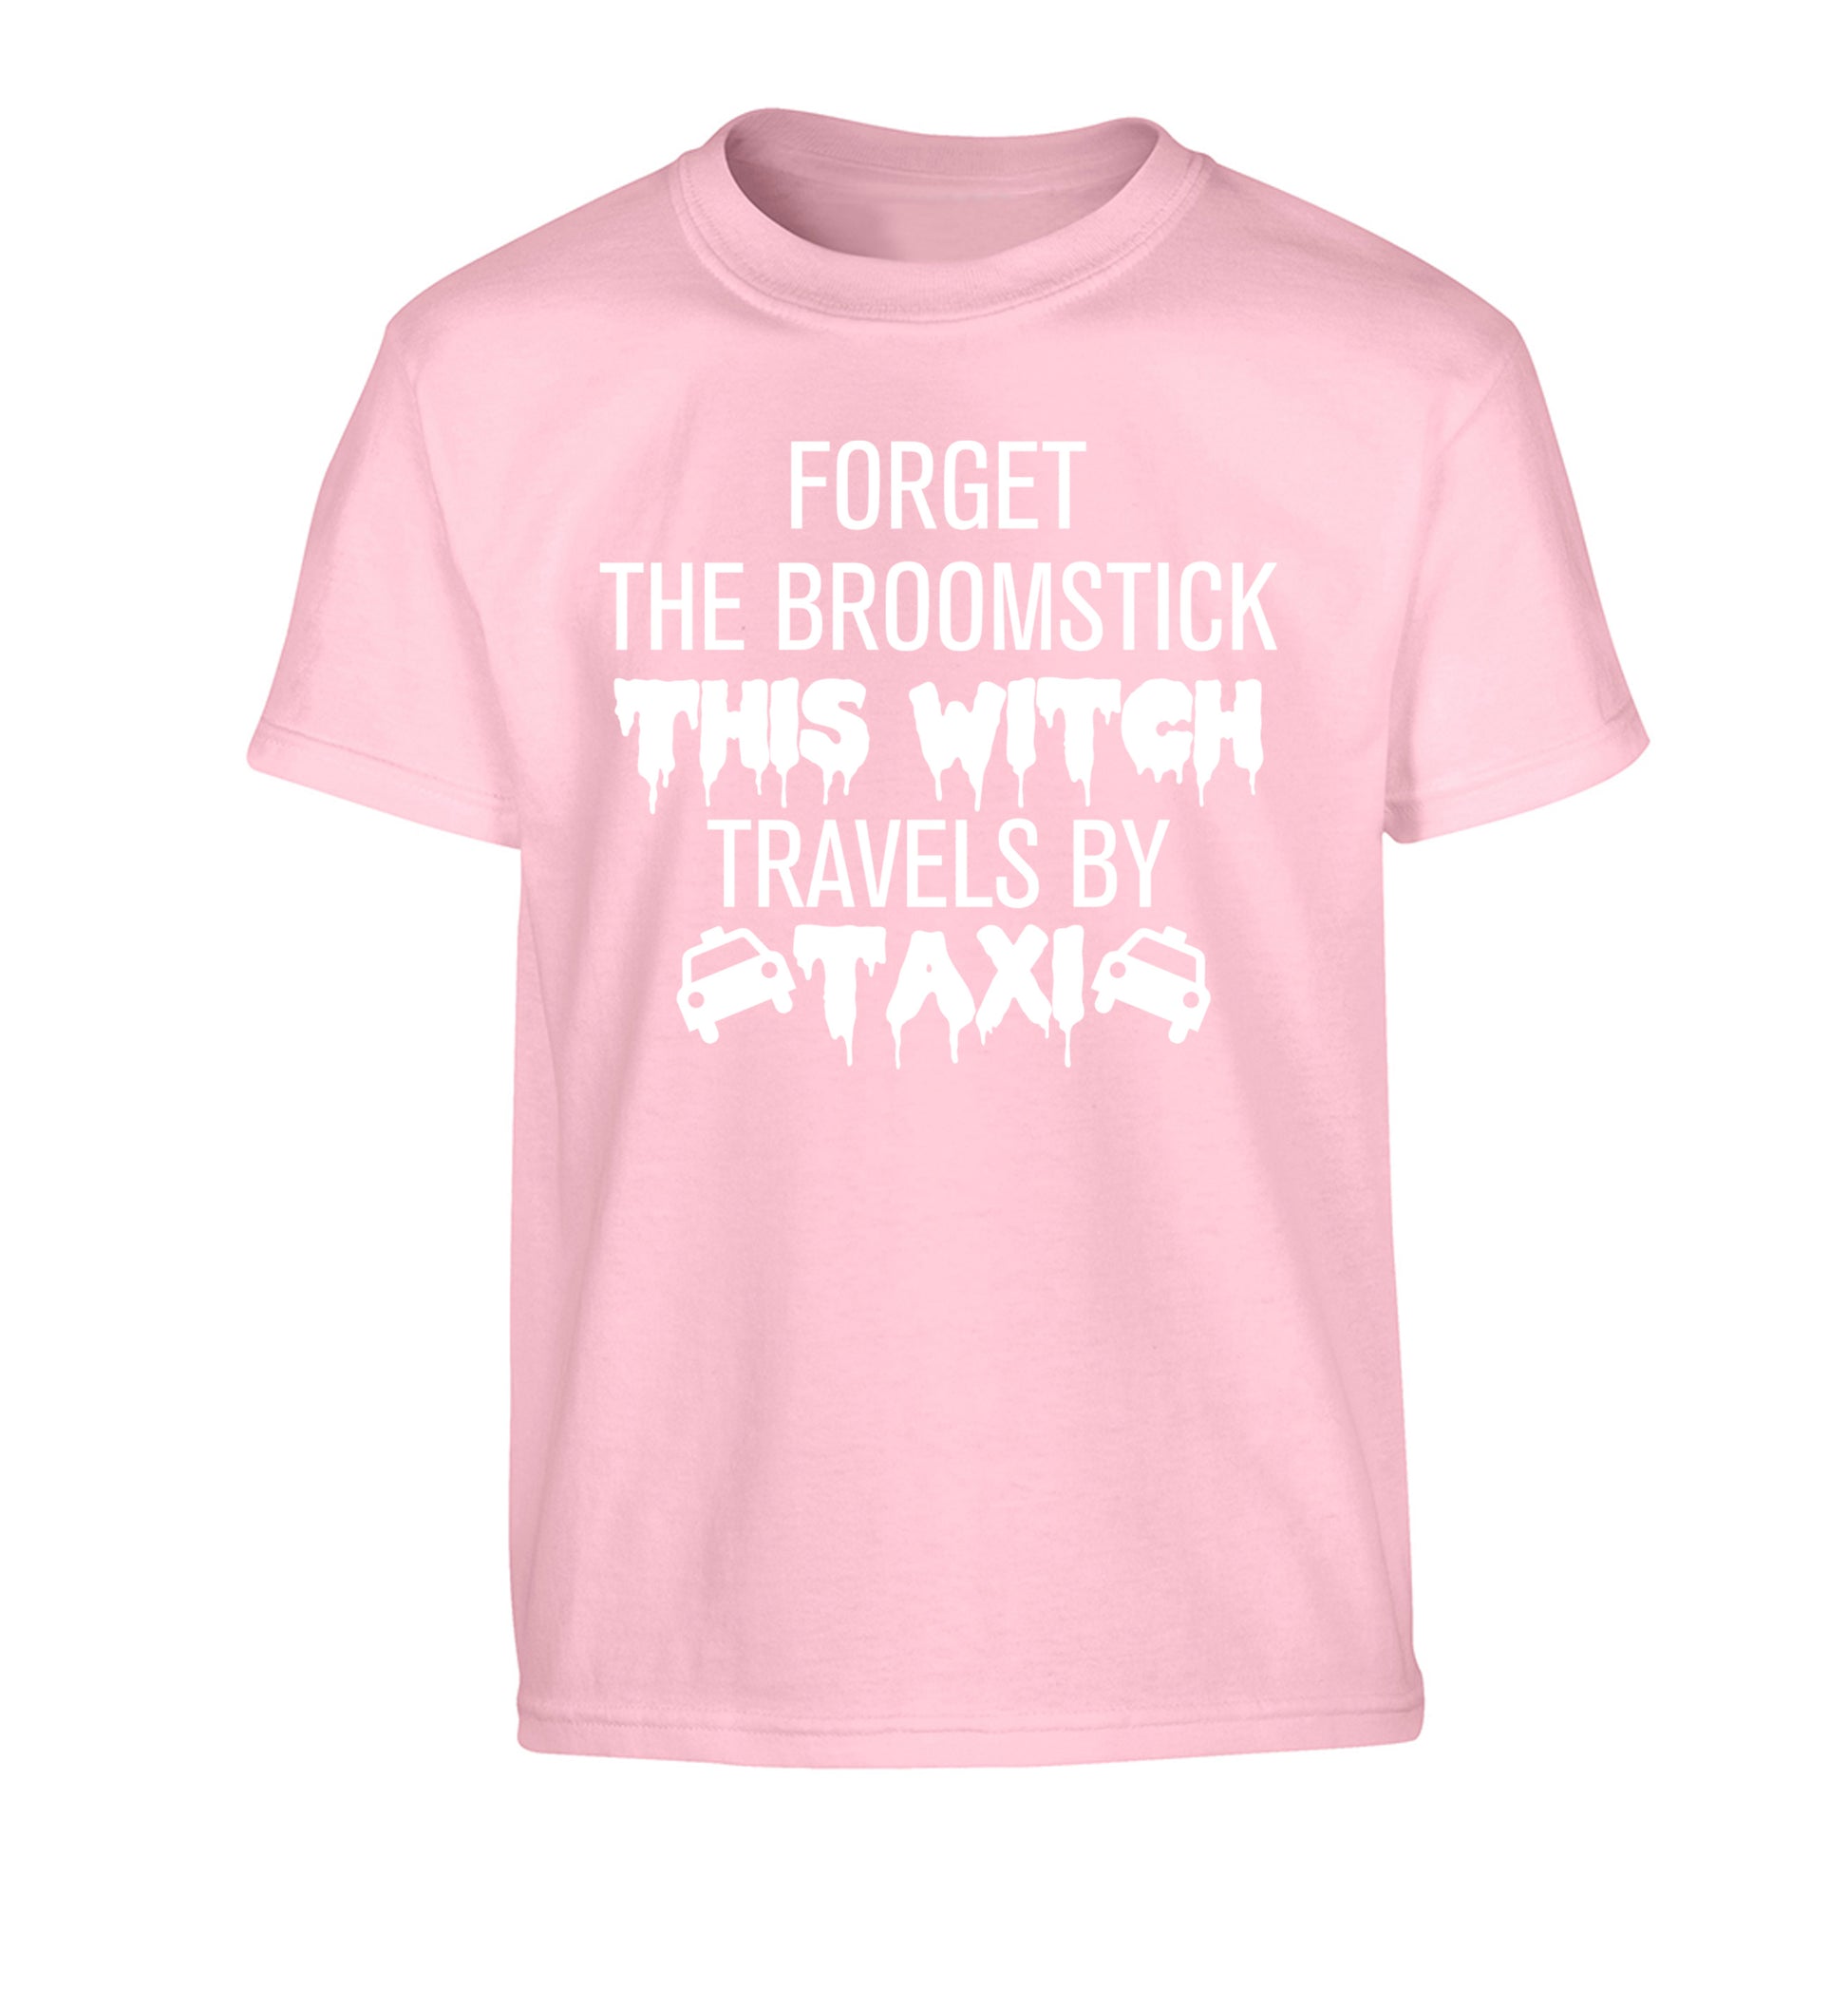 Forget the broomstick this witch travels by taxi Children's light pink Tshirt 12-14 Years